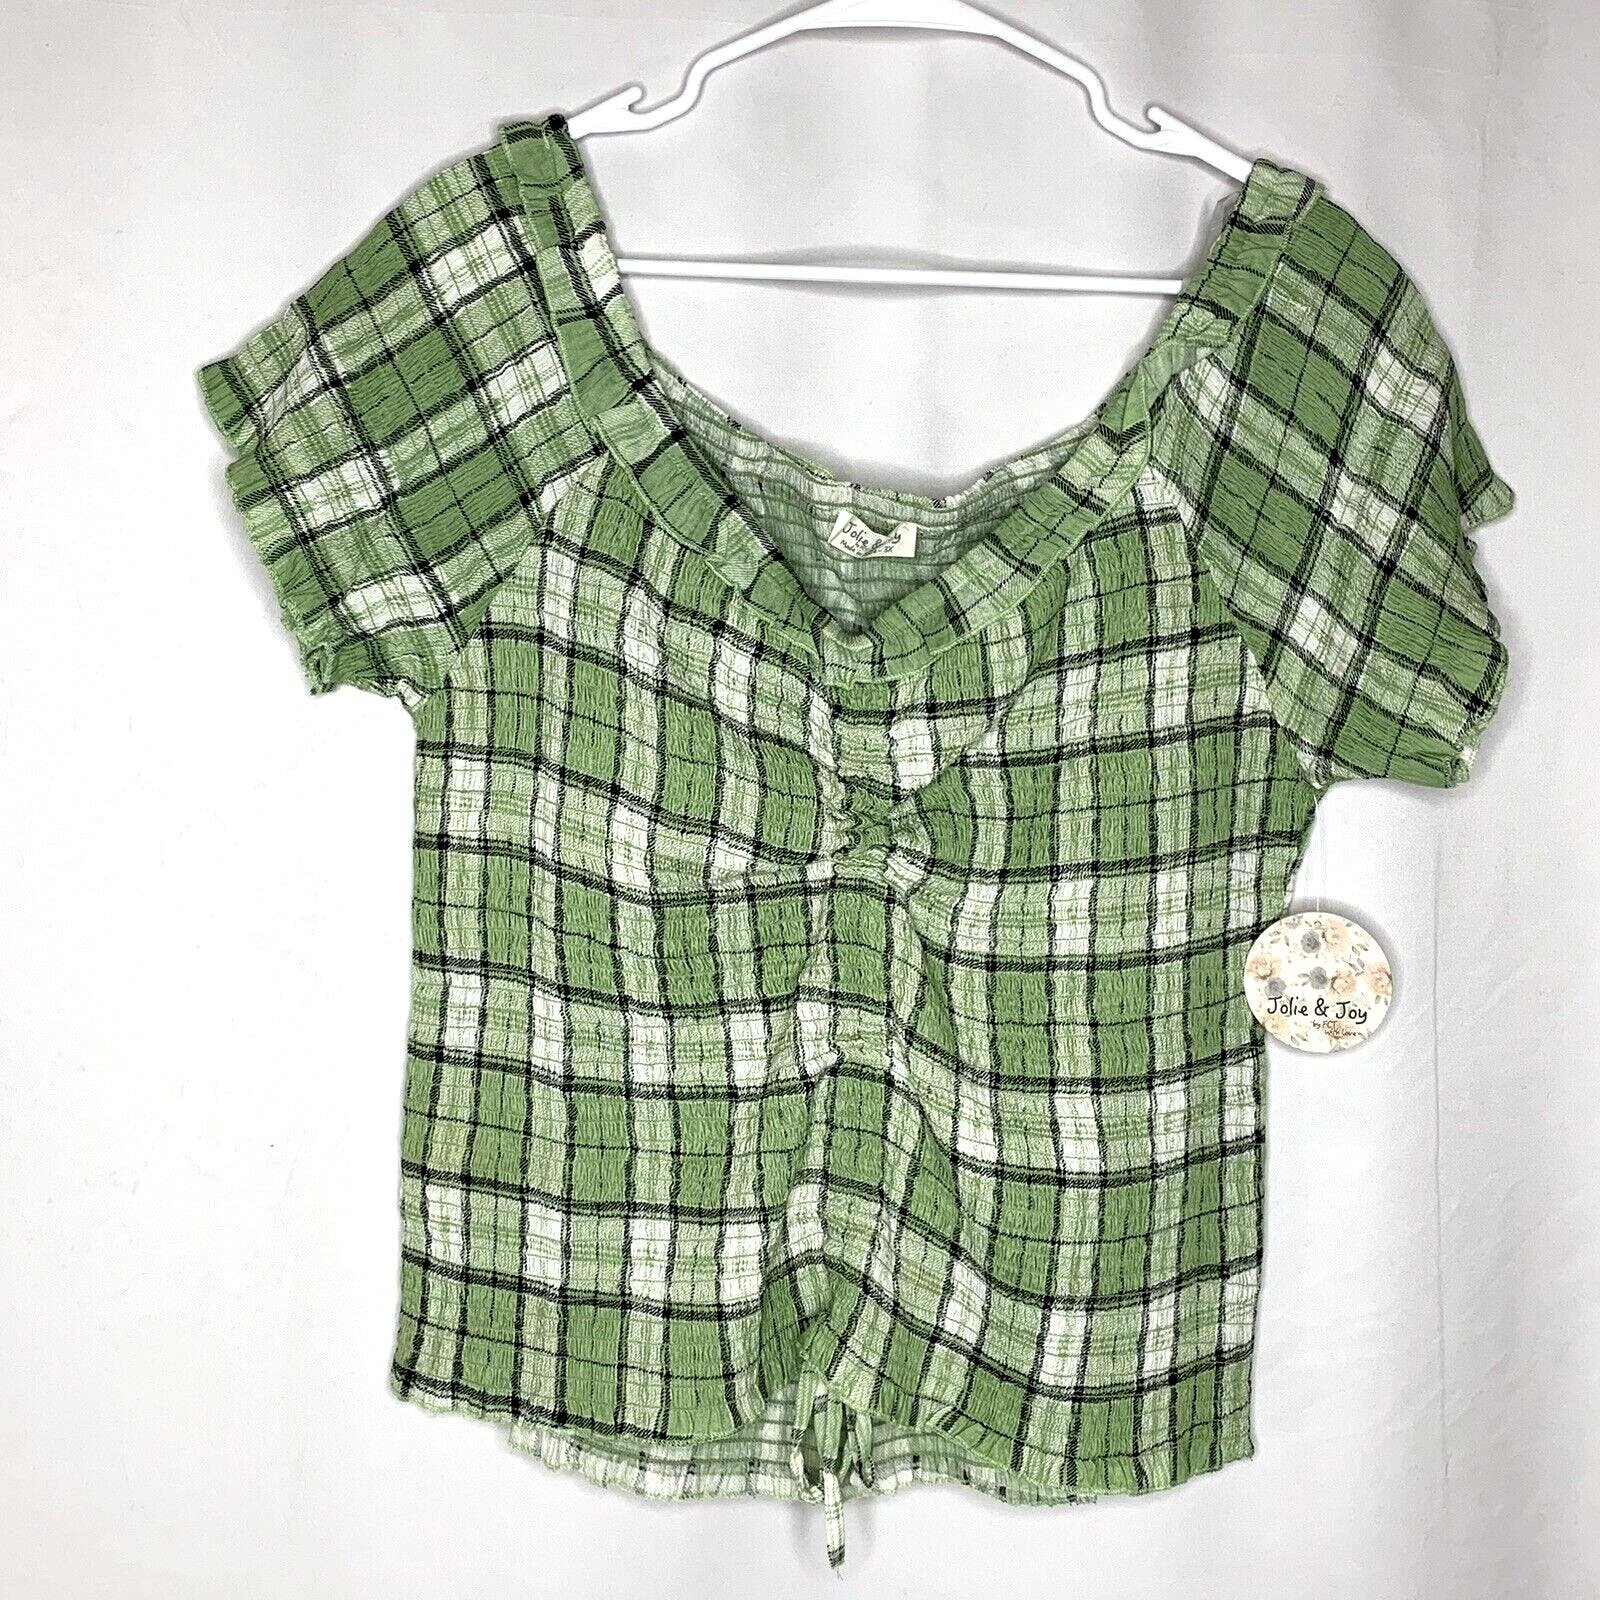 large selection Jolie And Joy Womens Top Shirt Size 3X 